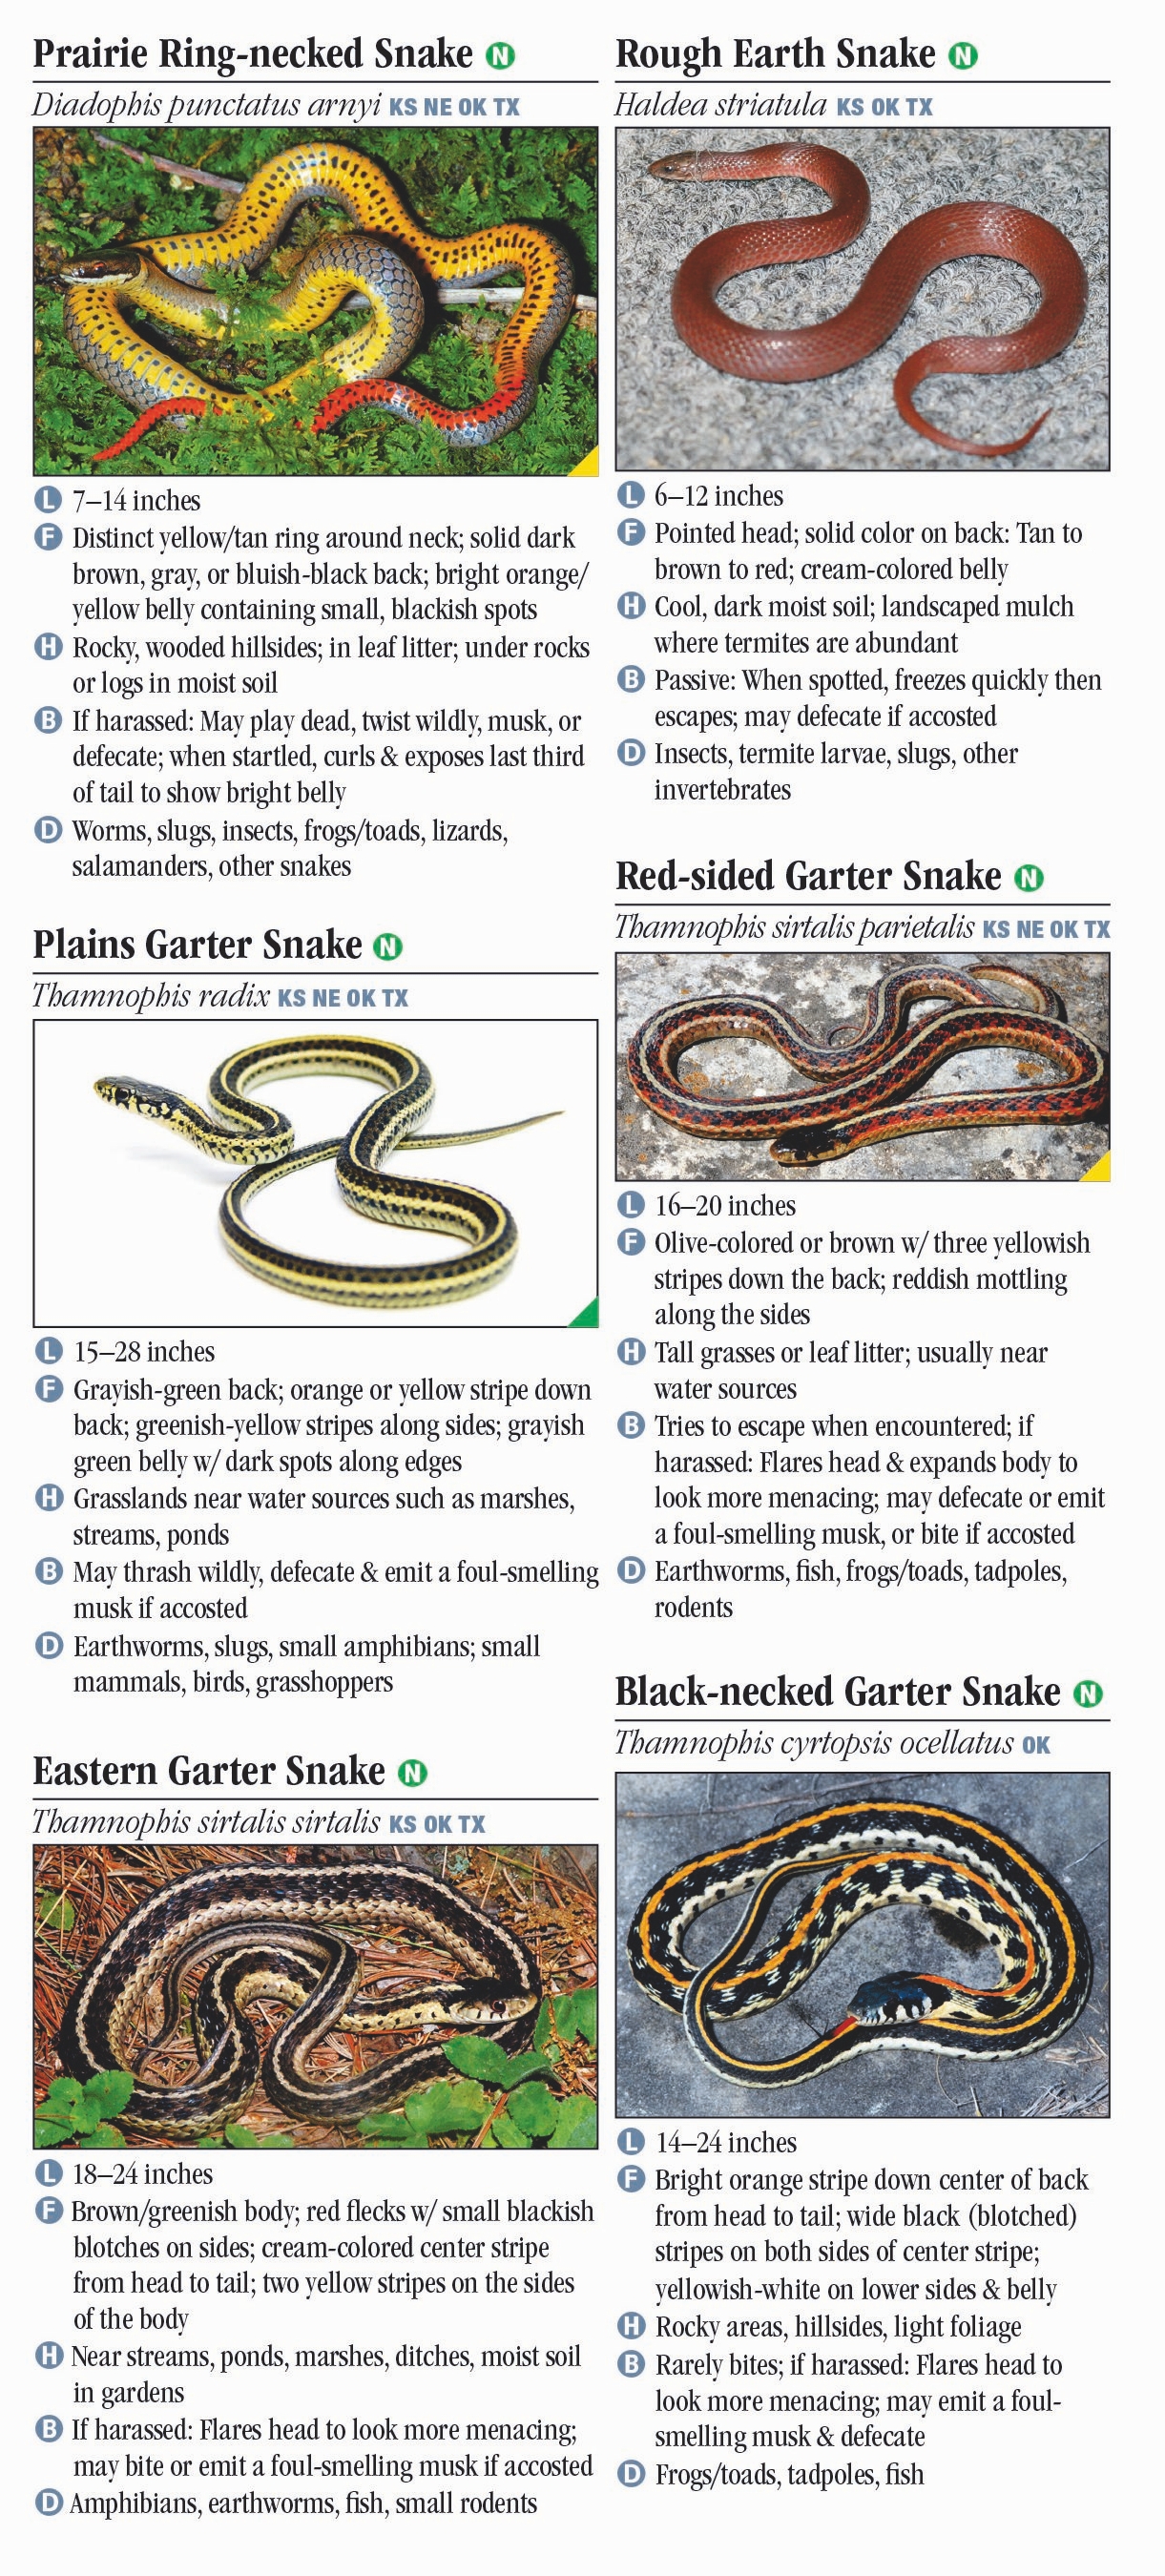 Snakes of the Great Plains – Quick Reference Publishing Retail